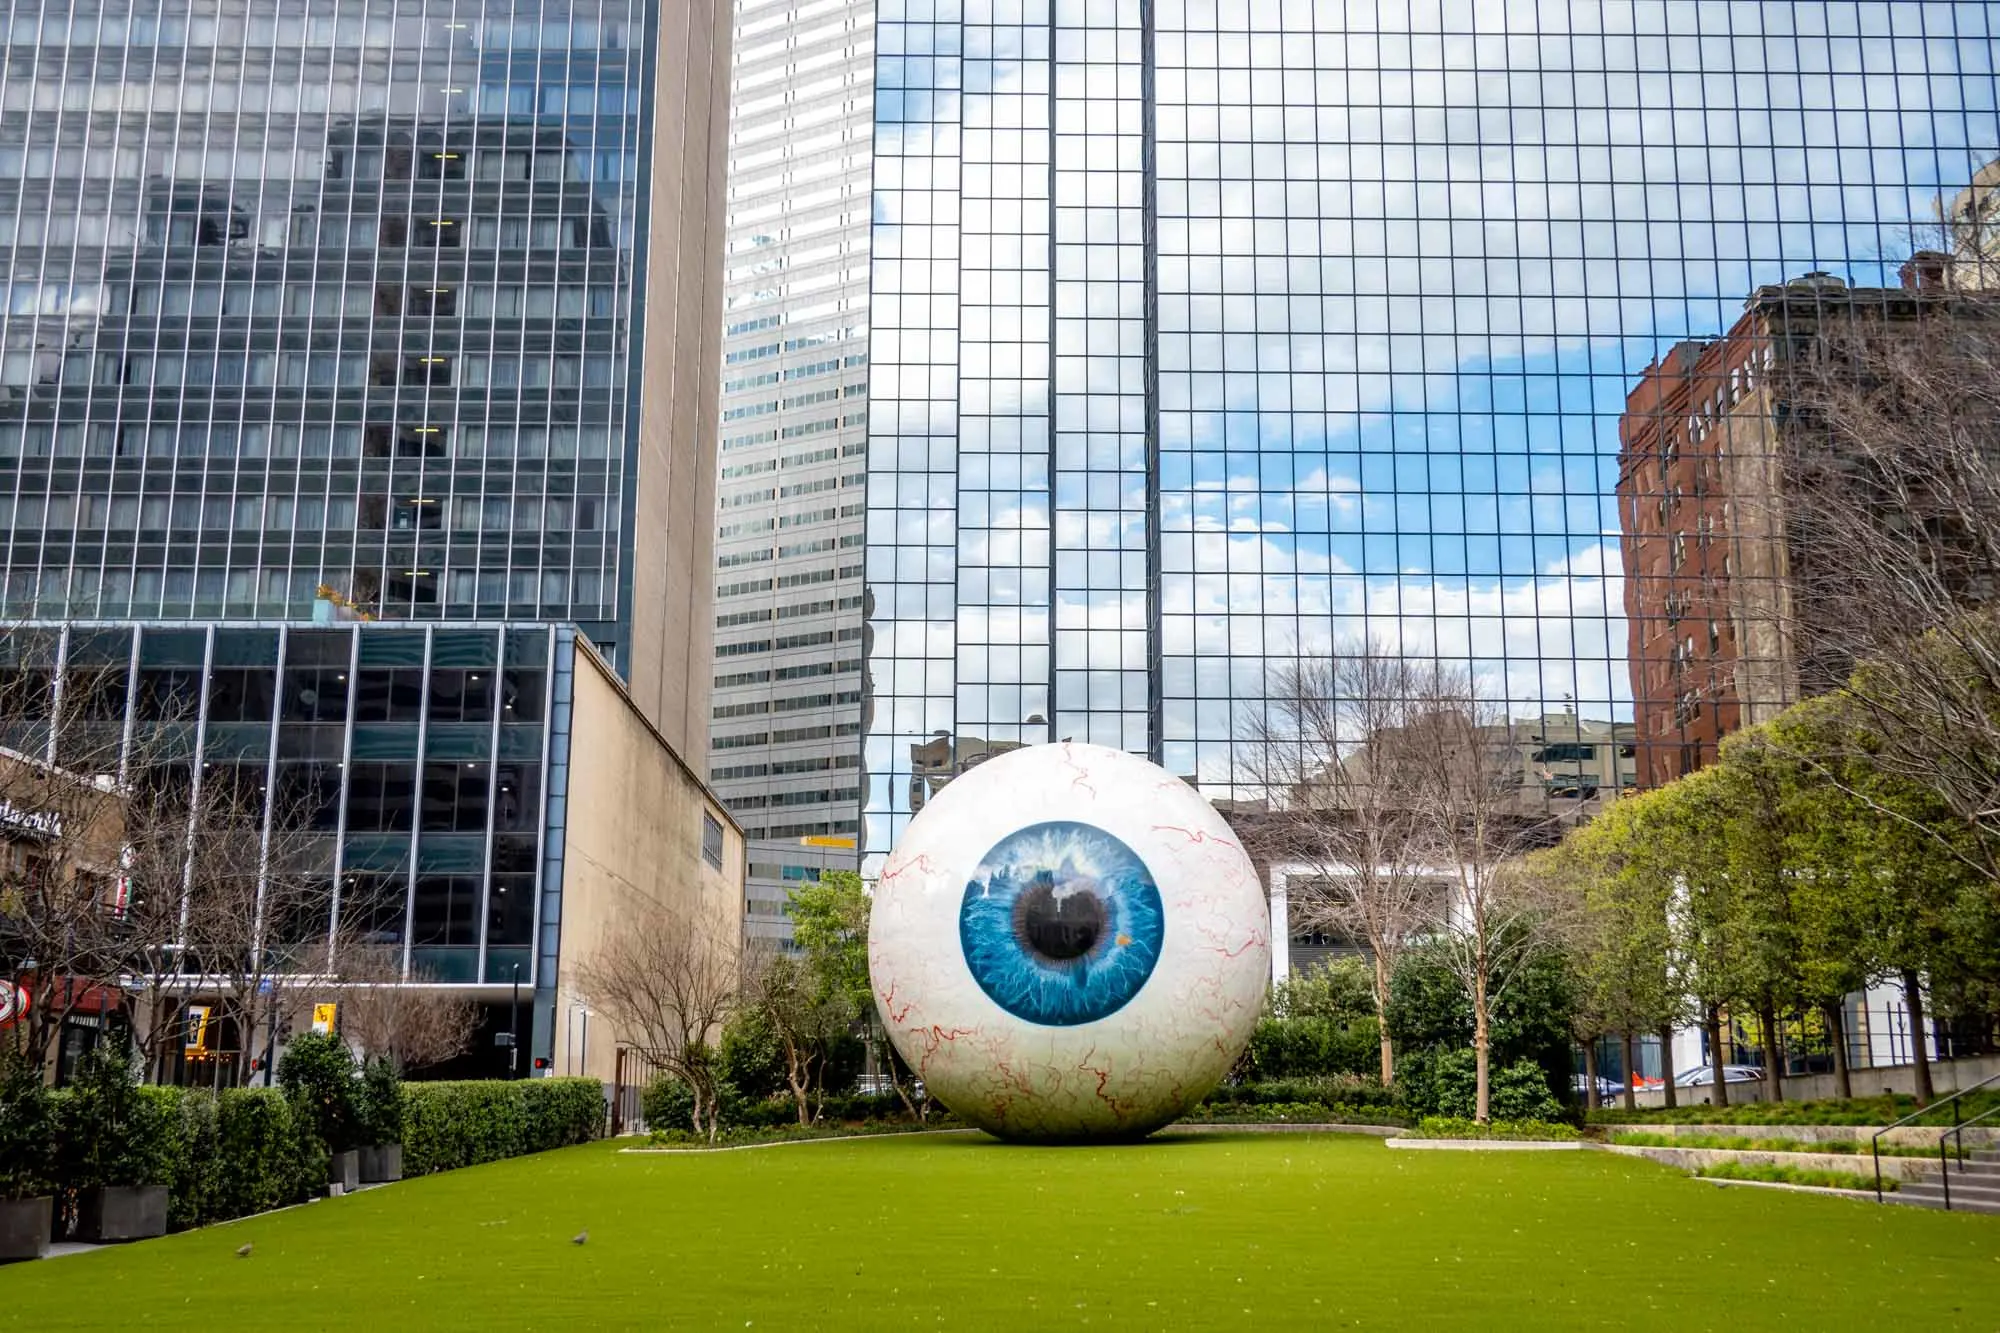 Giant eyeball sculpture on grass in front of office buildings.